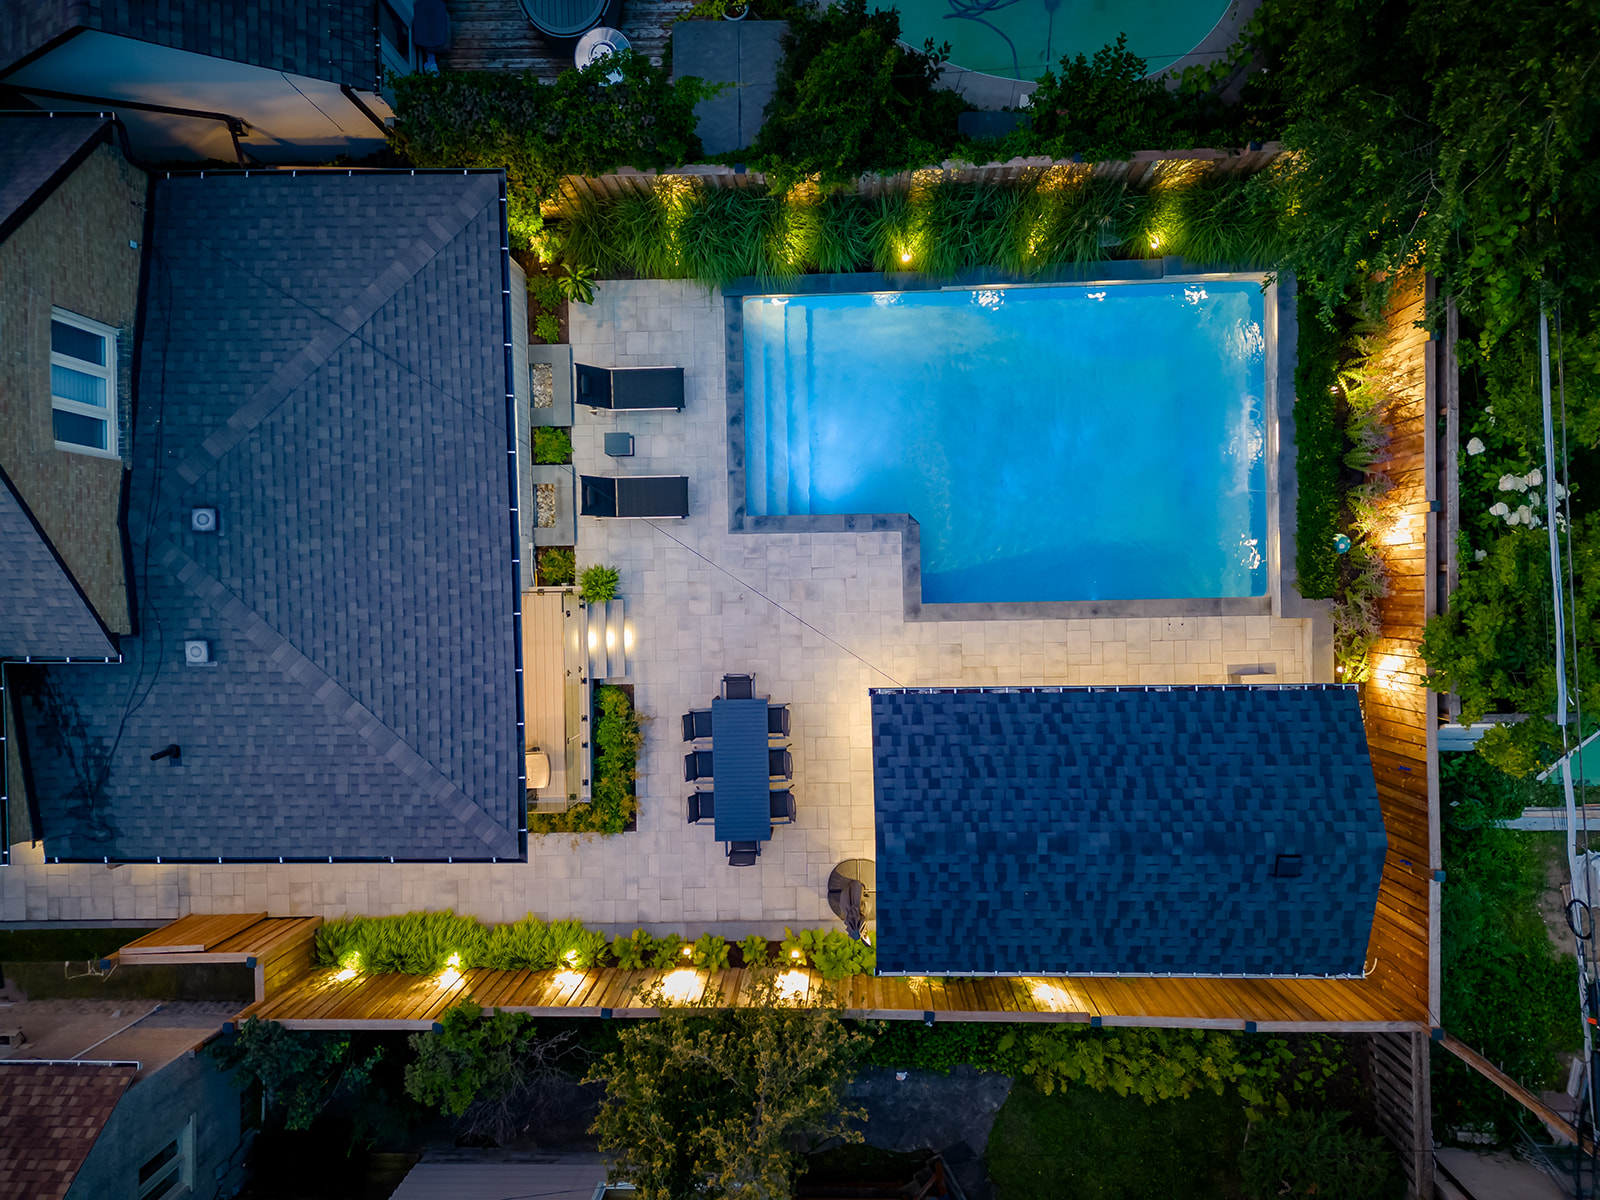 A top-down view of the backyard.